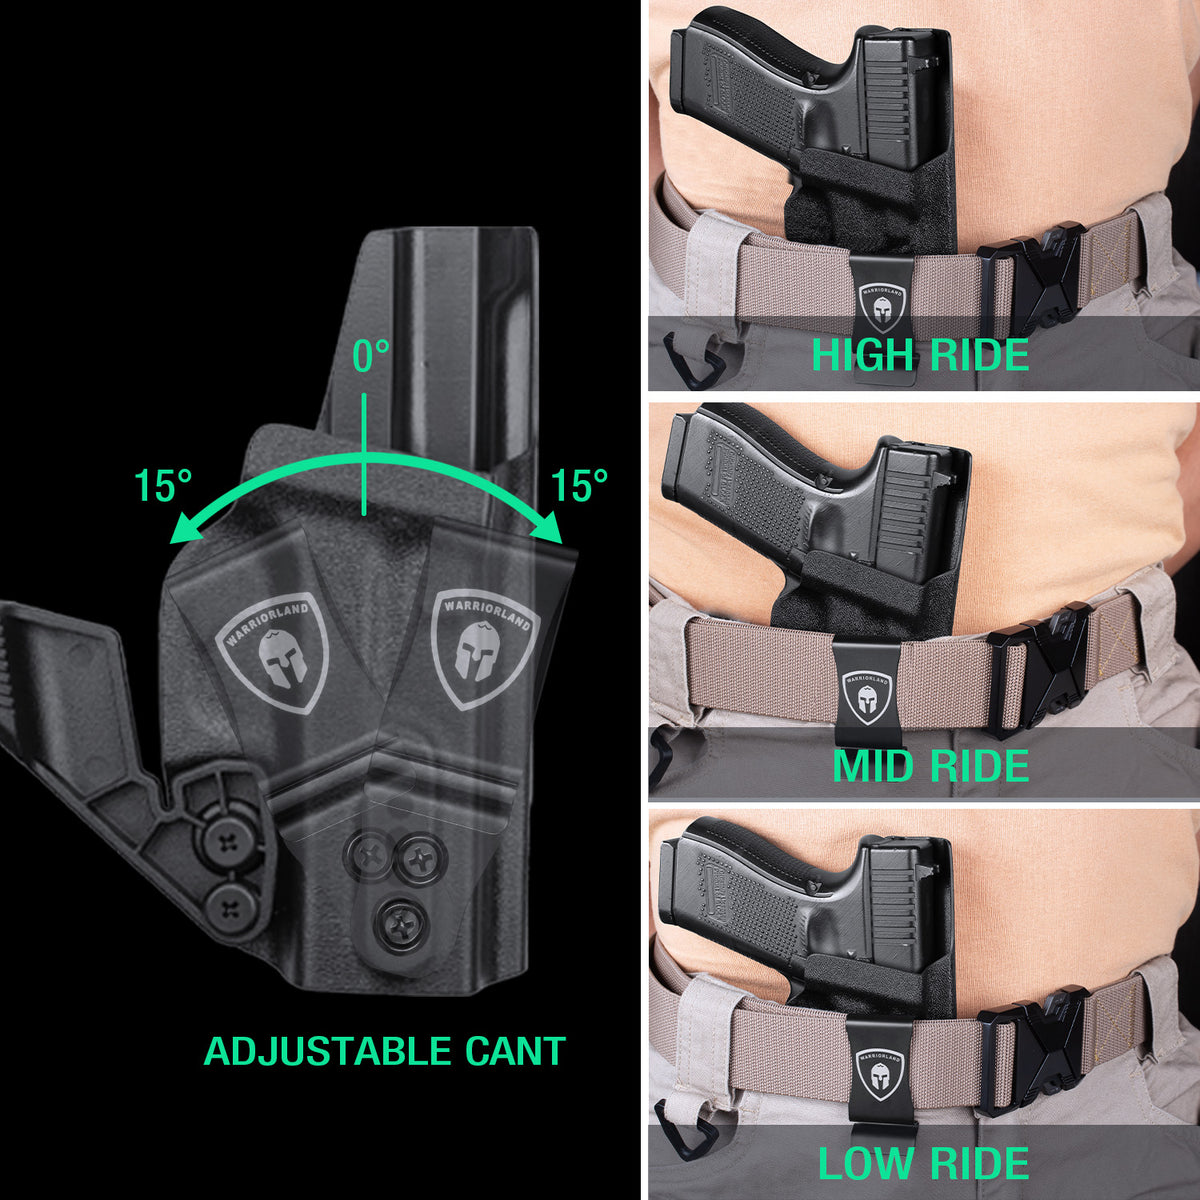 IWB Kydex Holster with Claw for Glock 26, Optic Ready Holster, Metal Belt Clip, 0.06 inch Kydex | Right/Left Hand